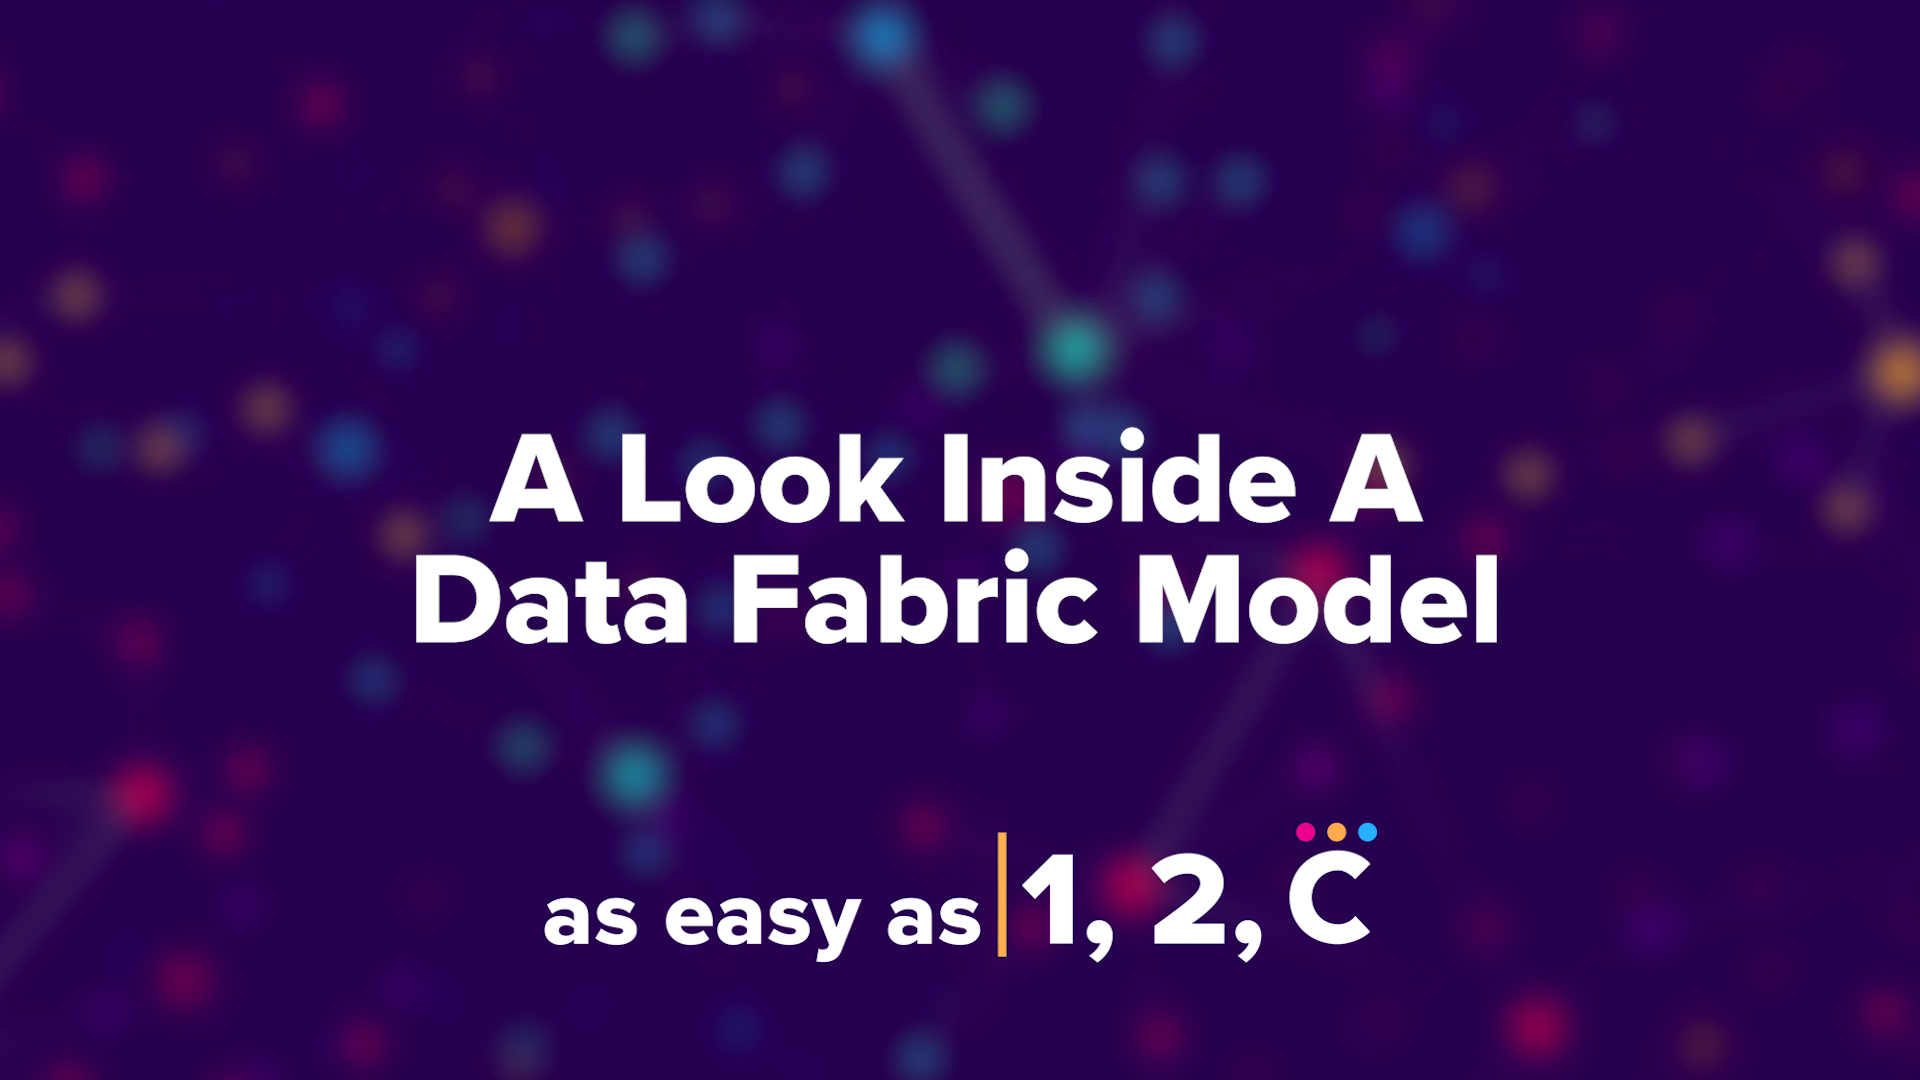 As Easy As 1, 2, C: A Look Inside A Data Fabric Model